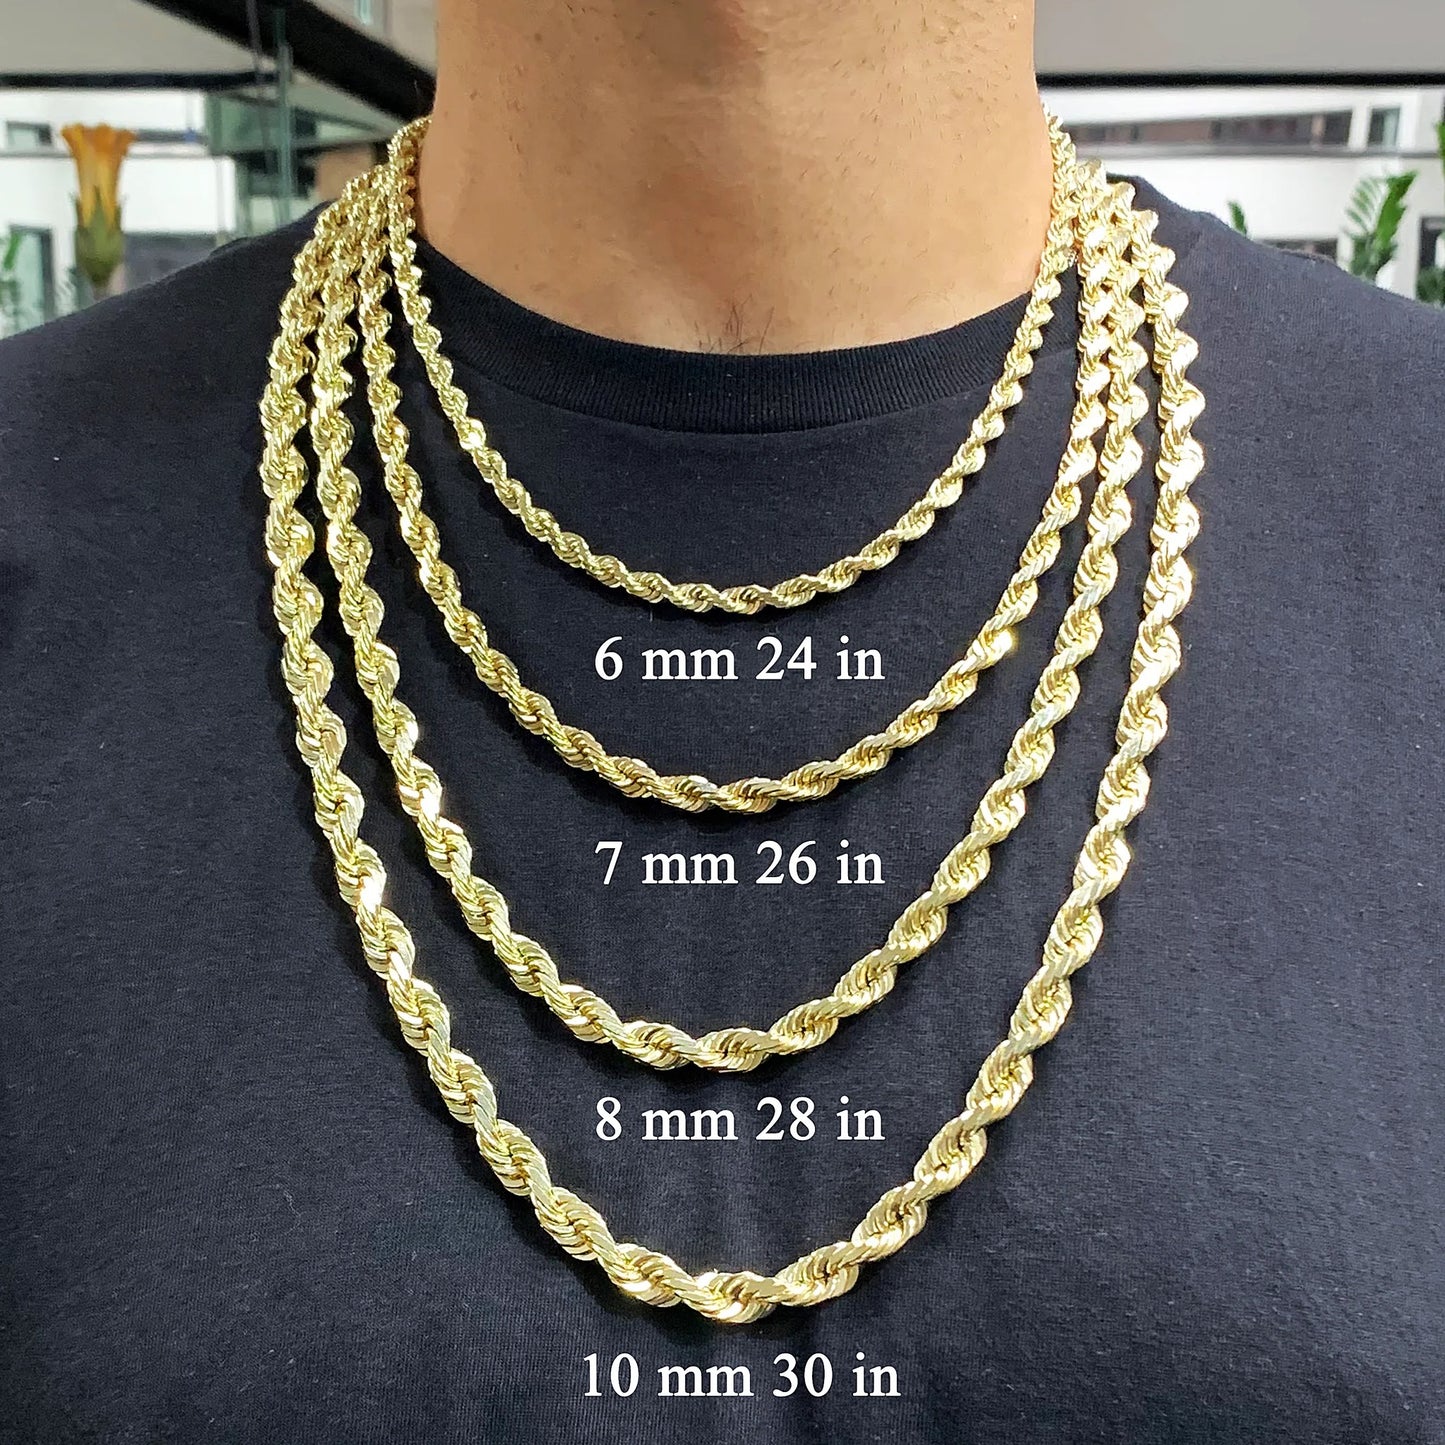 Rope Chain 7.0mm 26 inches 14k